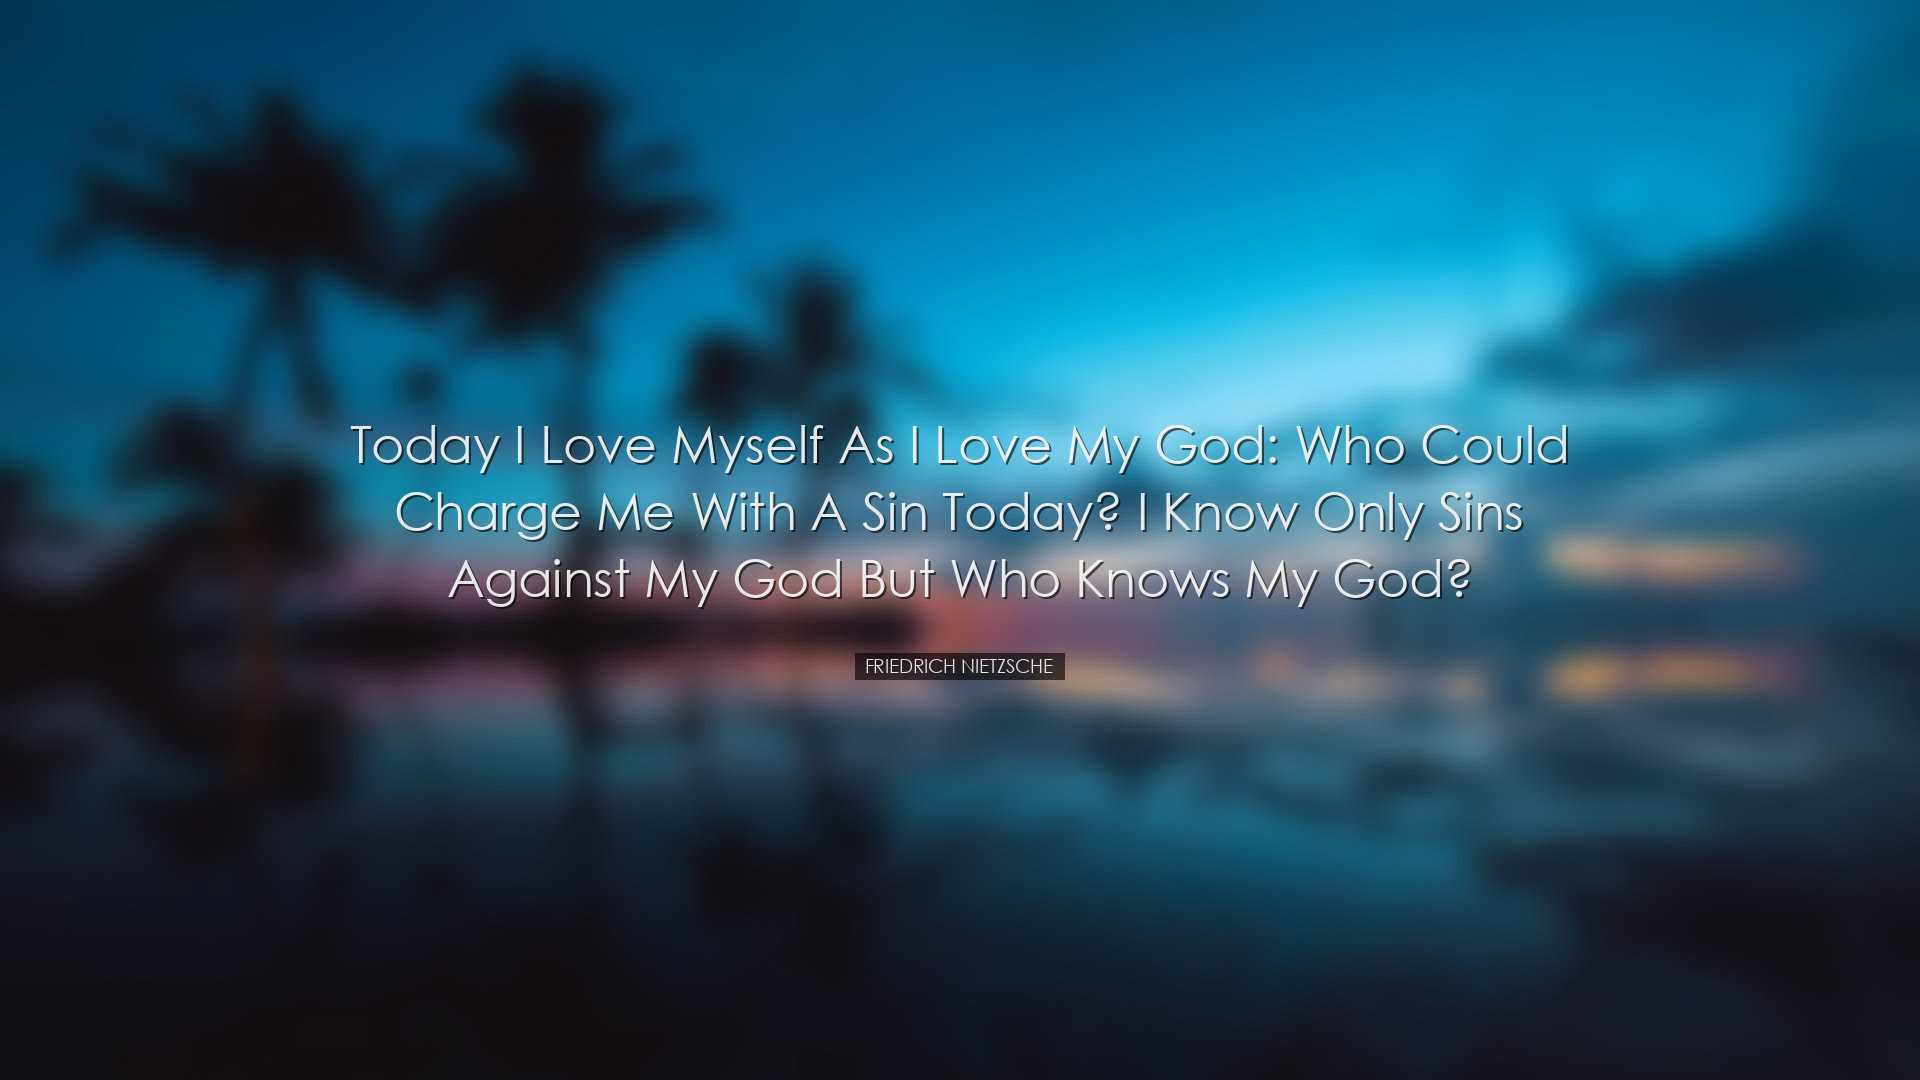 Today I love myself as I love my god: who could charge me with a s